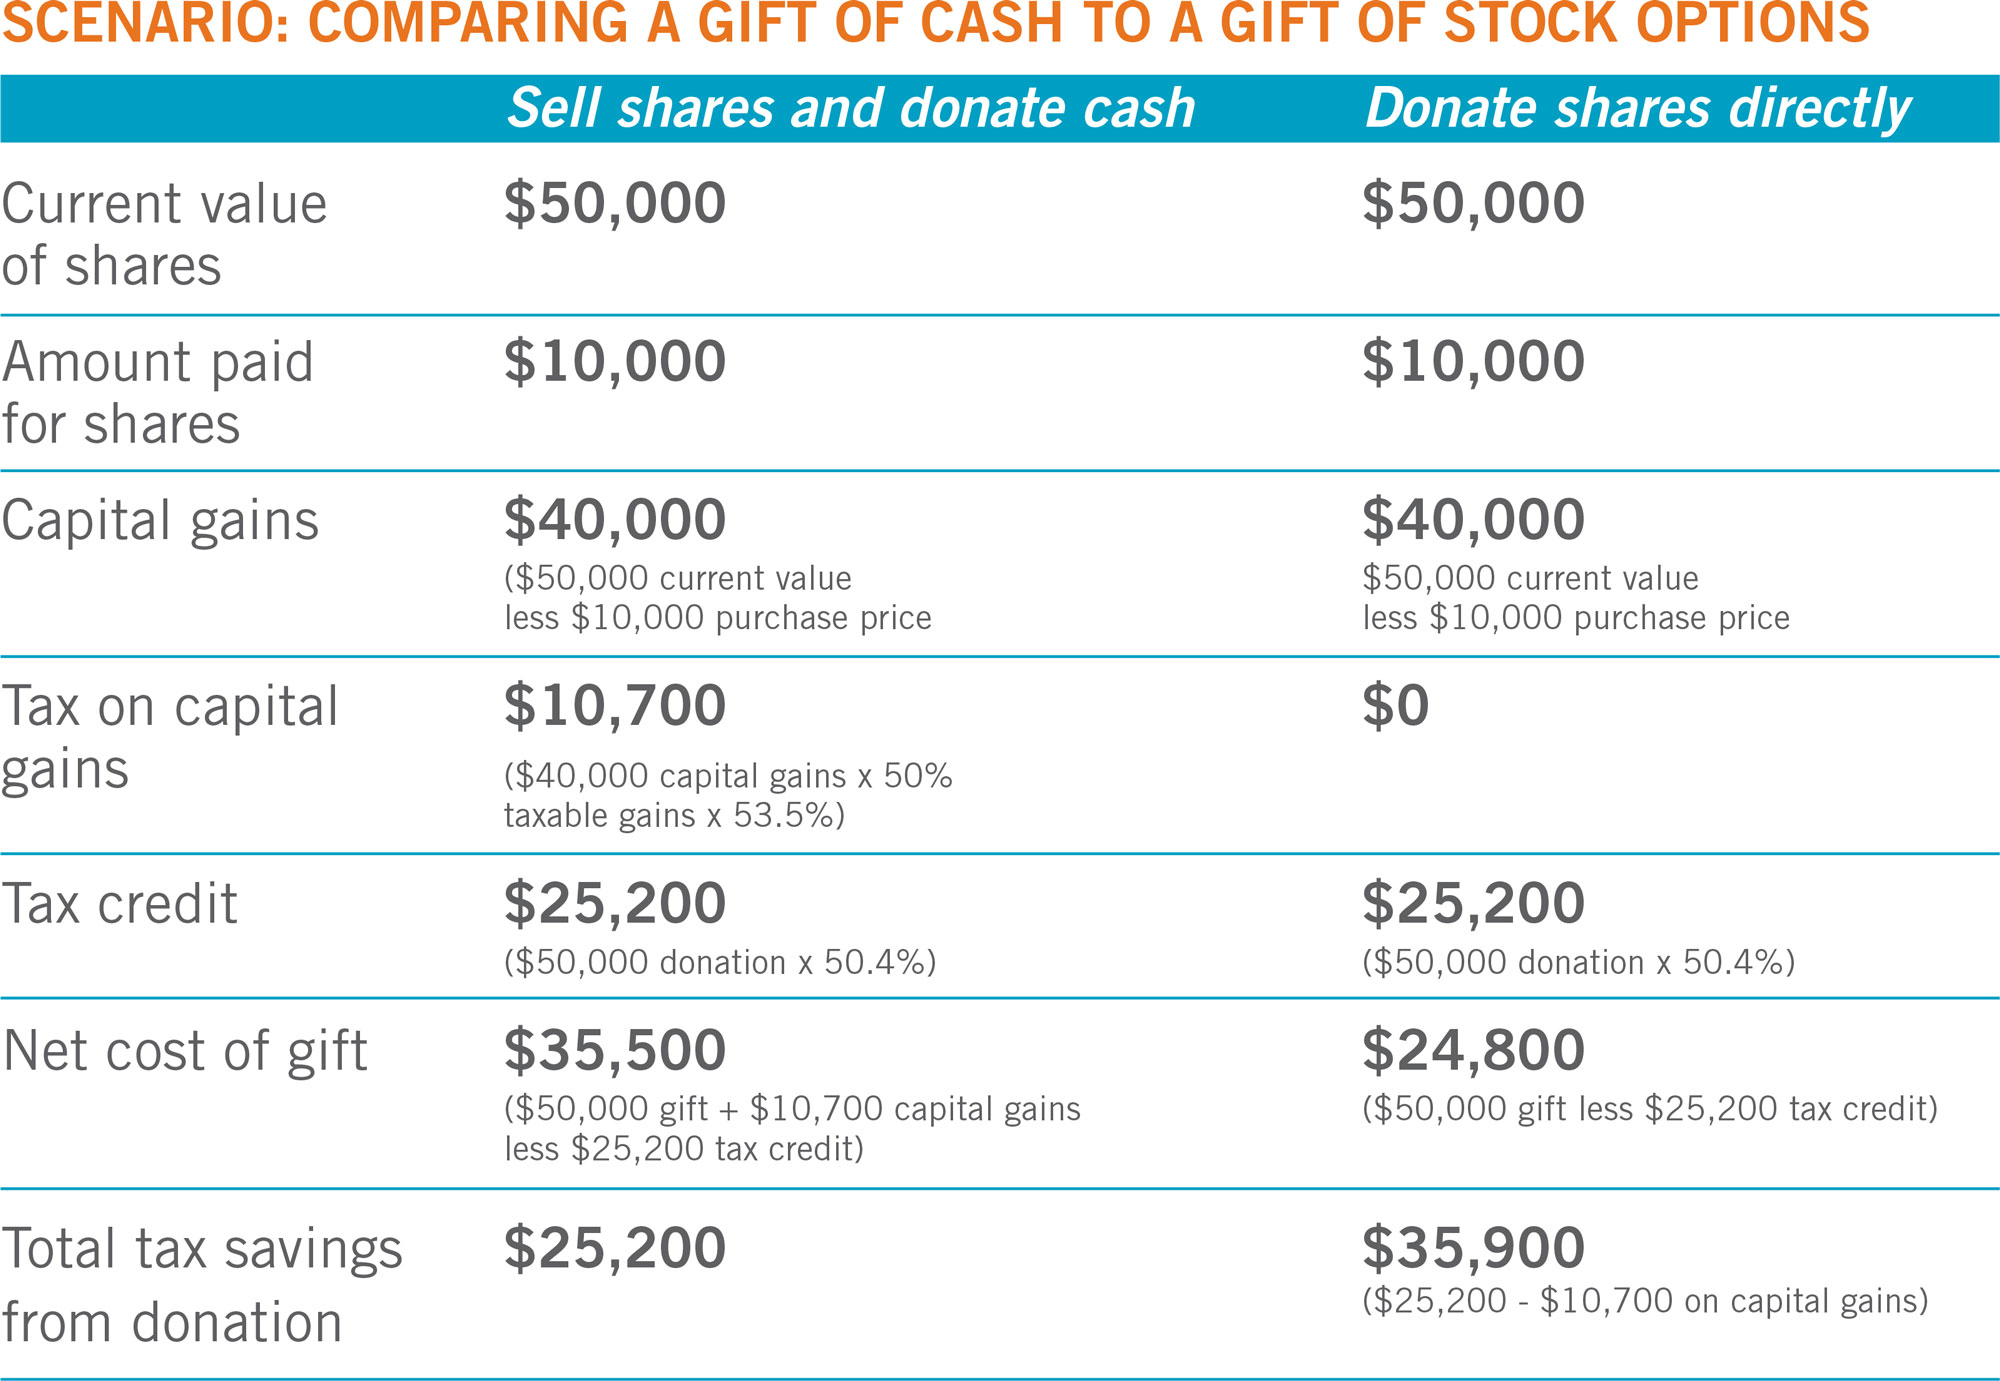 Chart for Comparing a Gift of Cash to a Gift of Stock Options